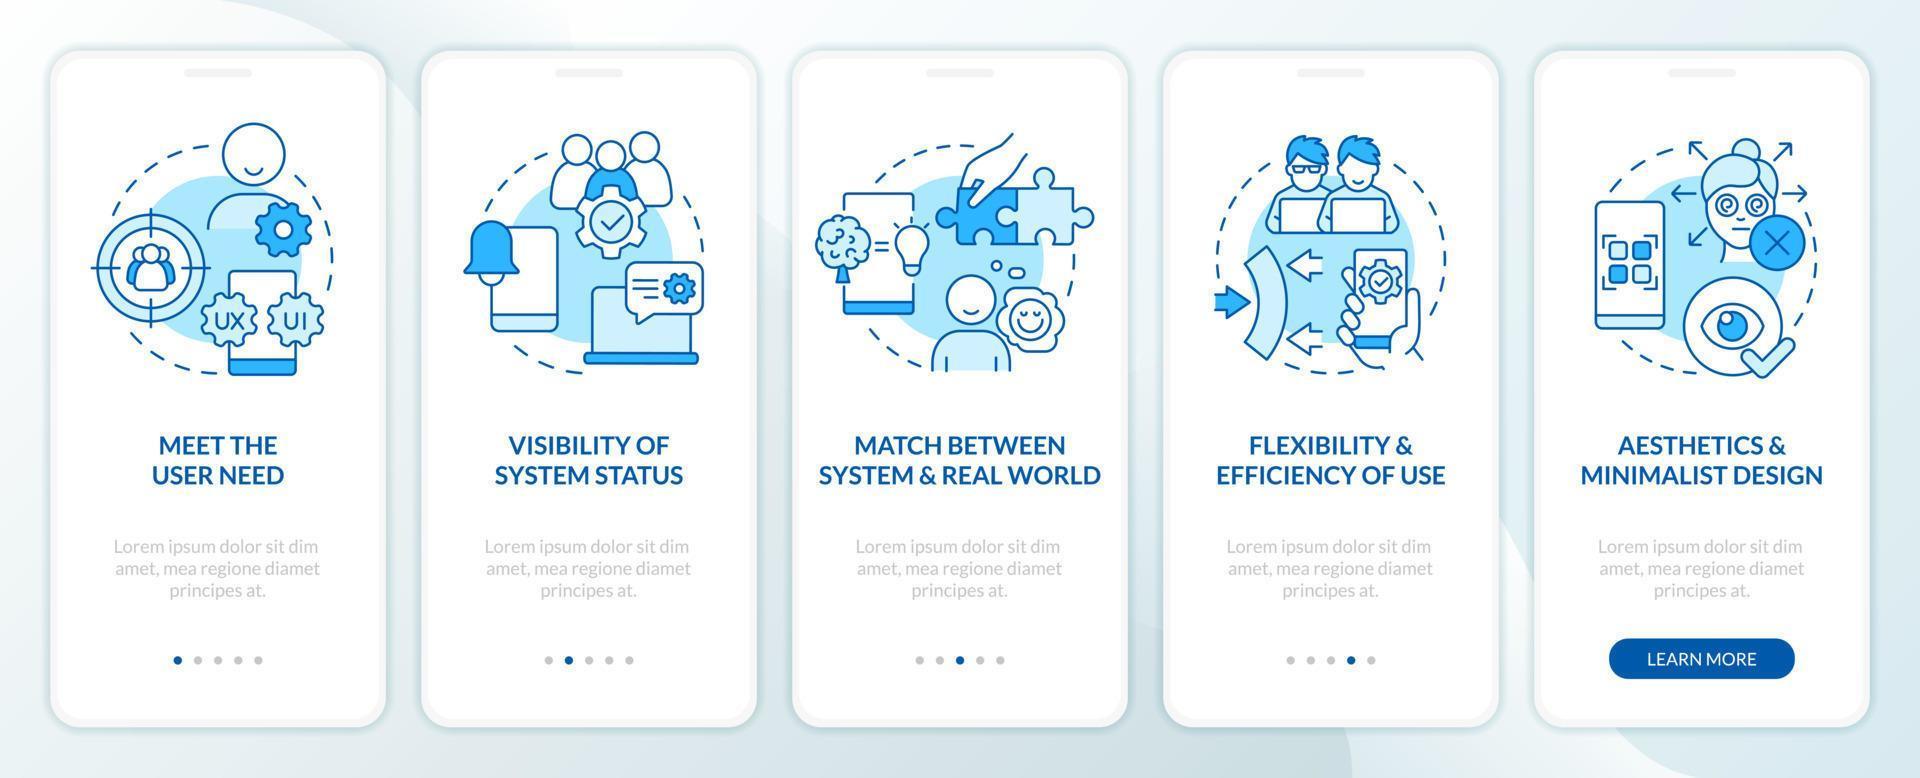 User experience design improving blue onboarding mobile app screen. Walkthrough 5 steps editable graphic instructions with linear concepts. UI, UX, GUI template vector